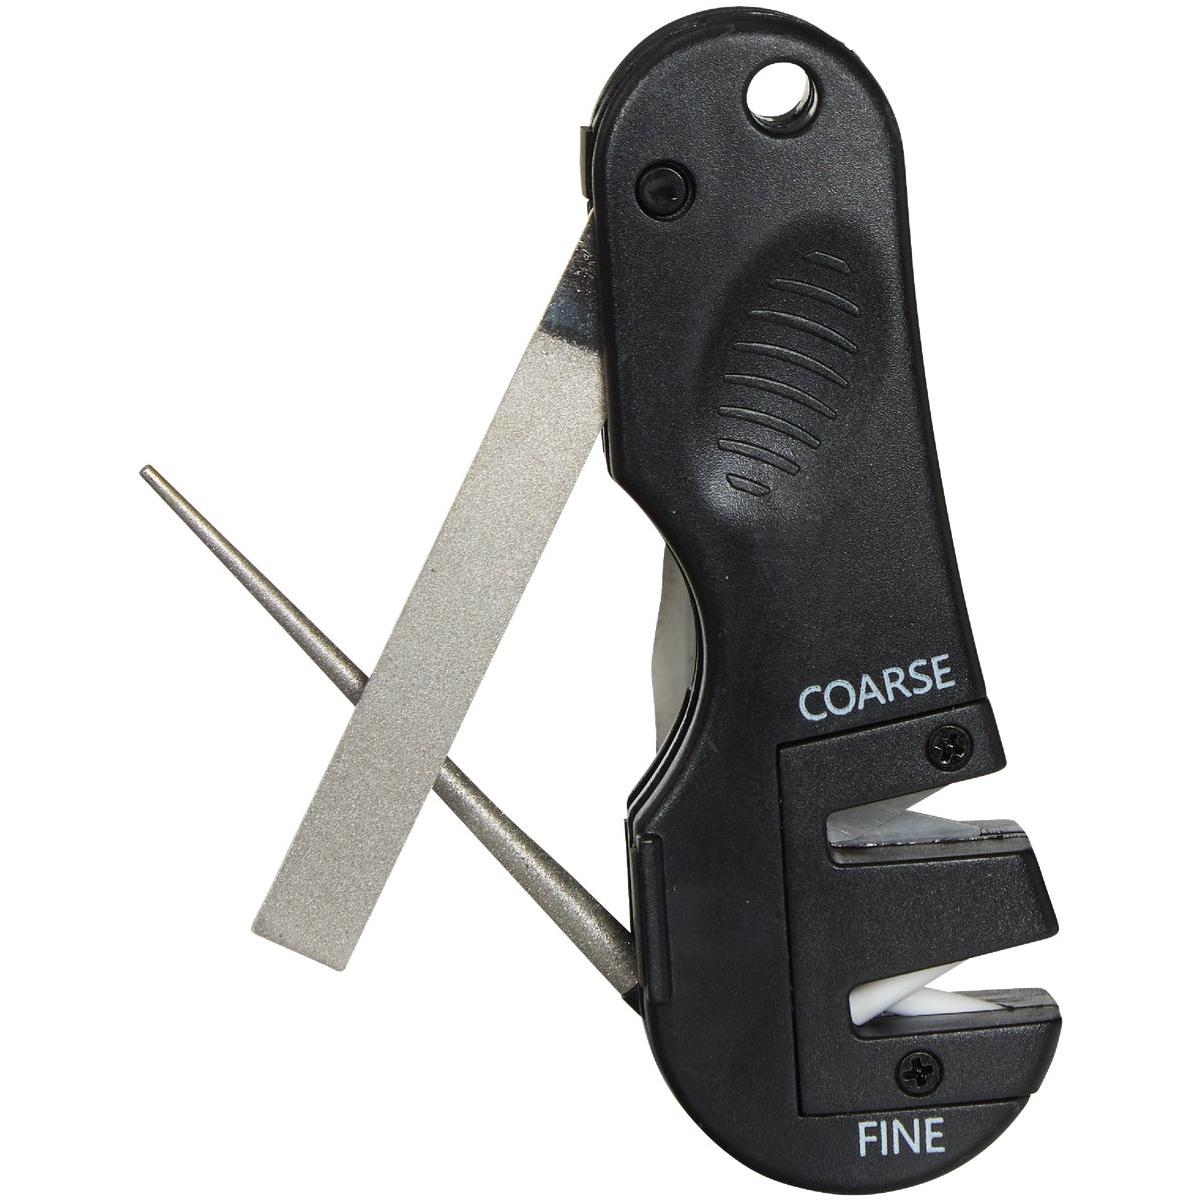 AccuSharp 2-Stage Diamond-Honed Tungsten Carbide 4-in-1 Knife